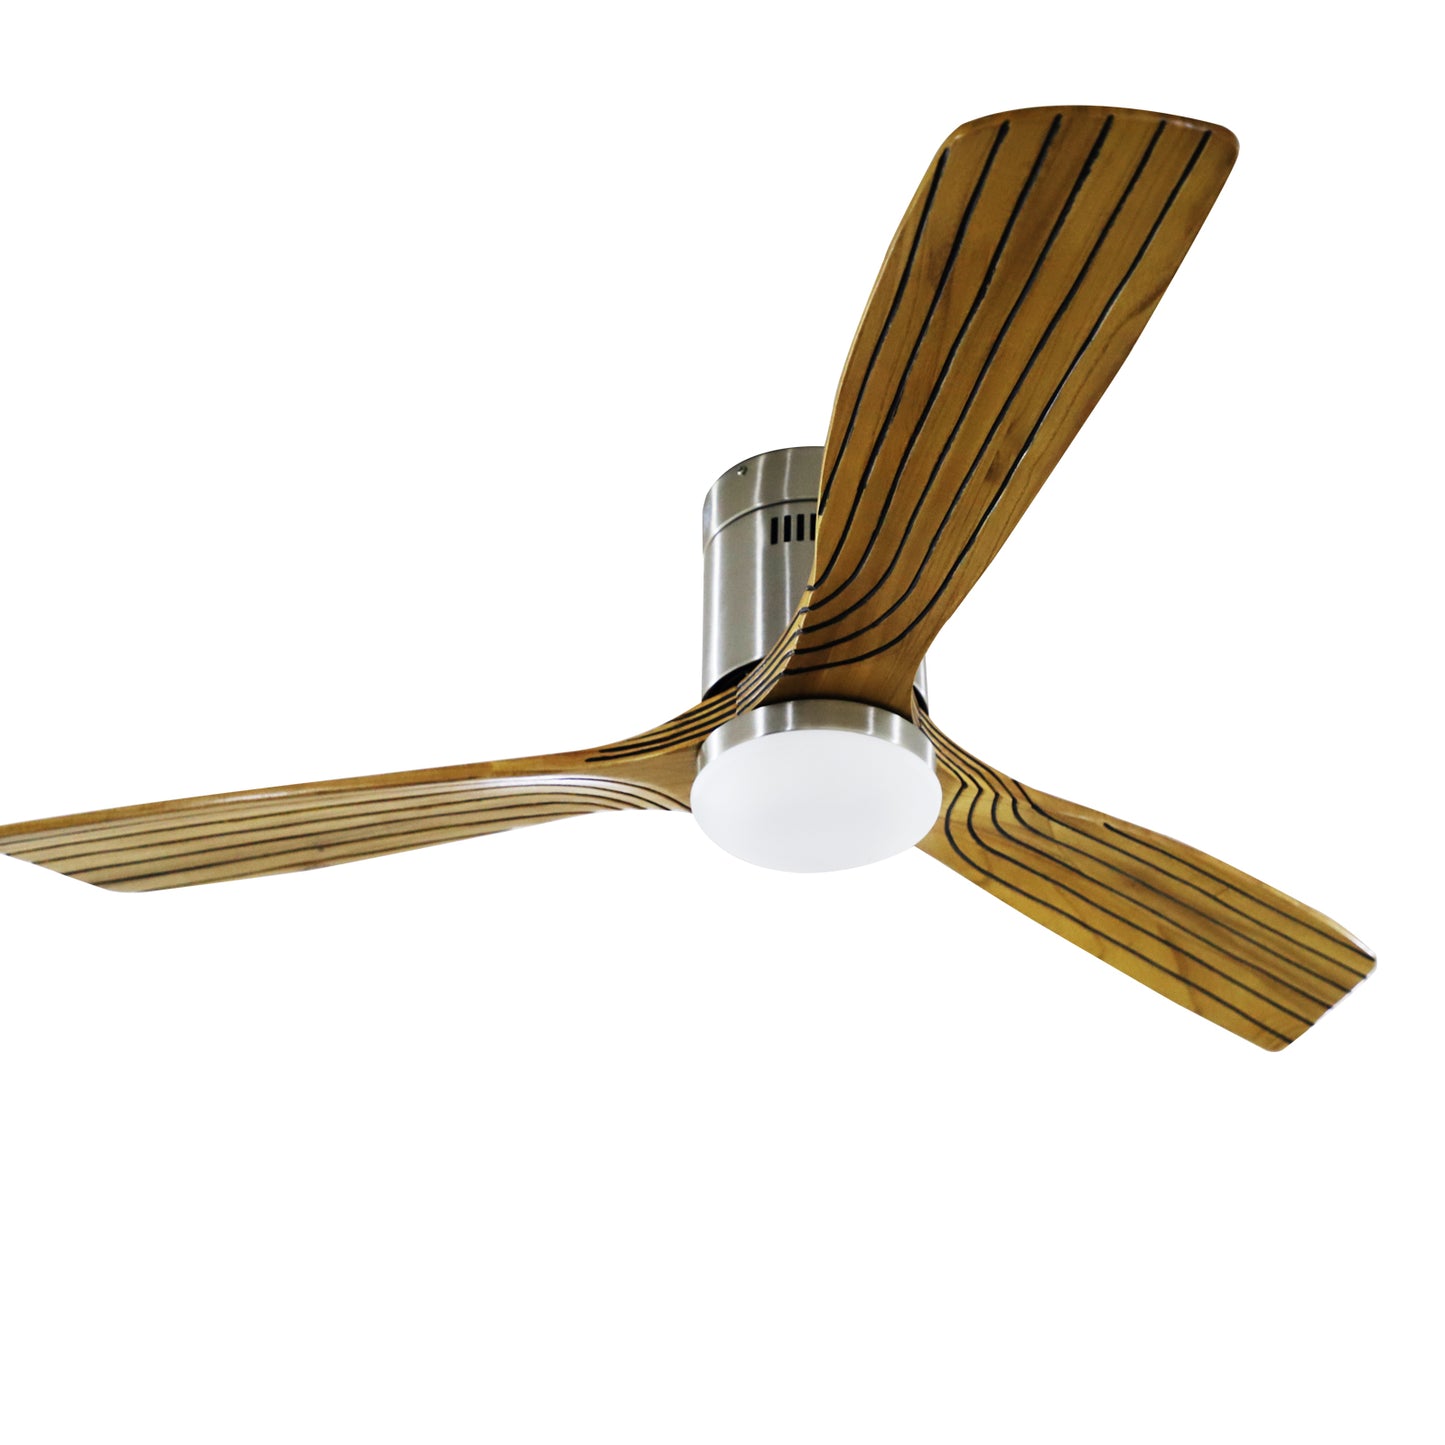 52" Indoor Solid Wood Brushed Nickel Wooden Morden Ceiling Fan With Light With Remote Control